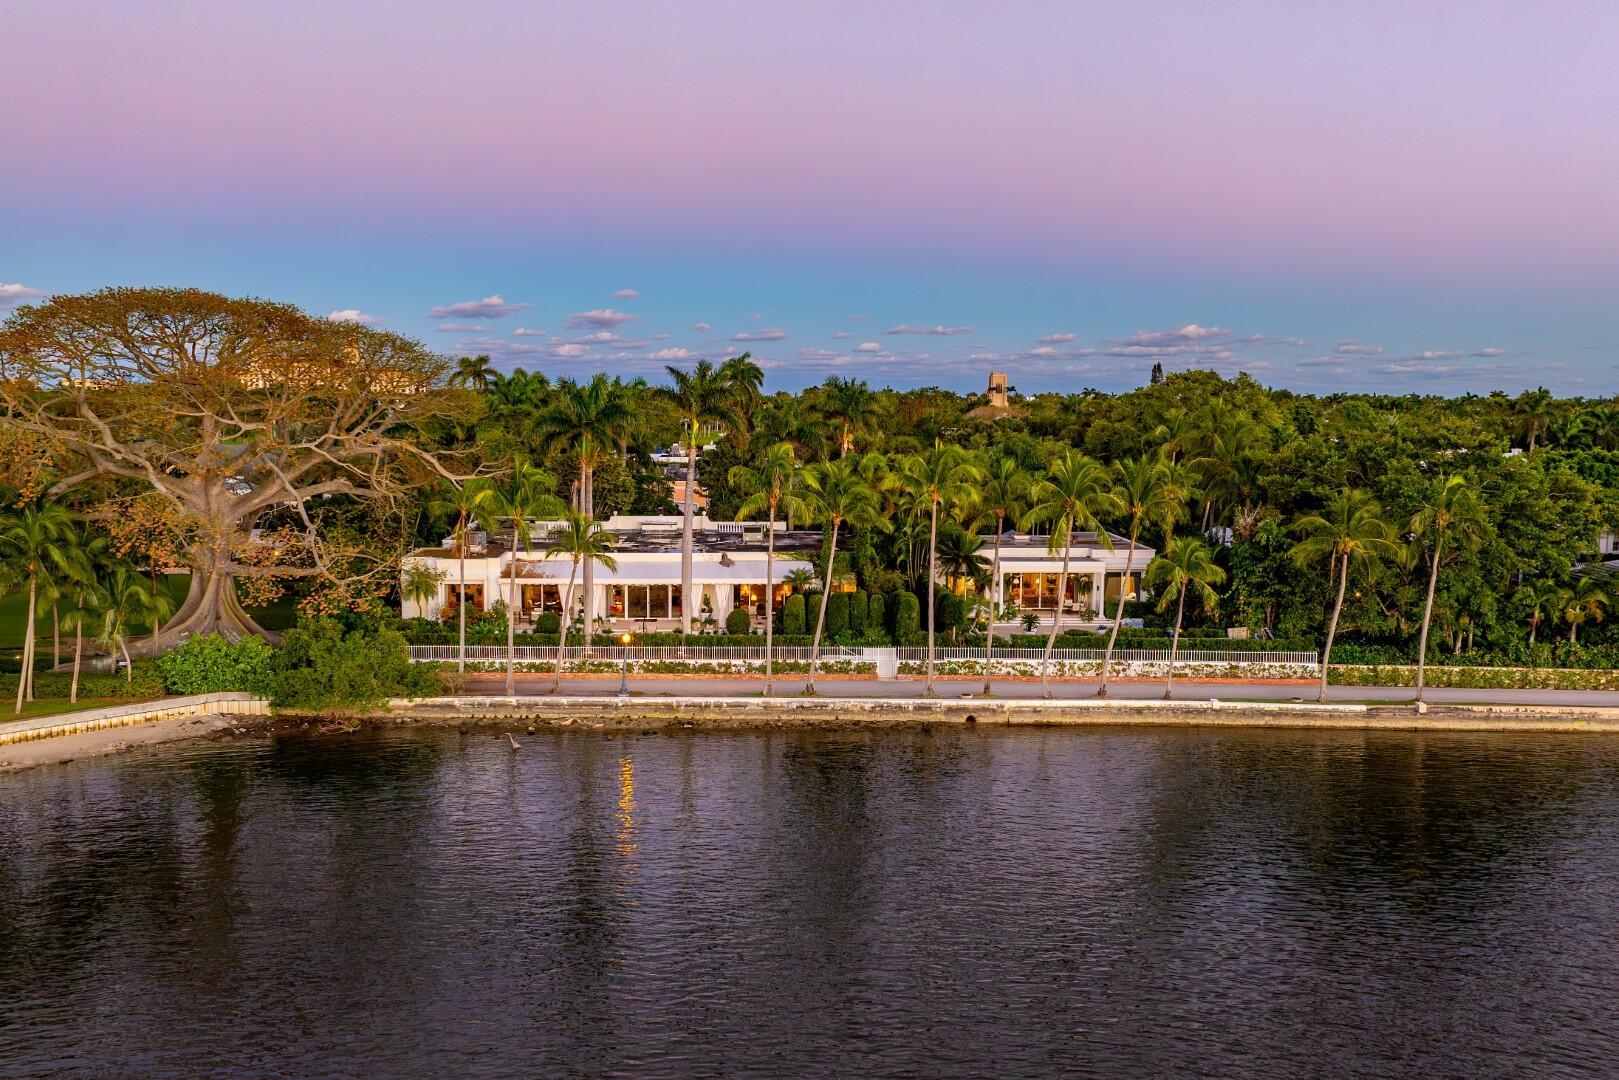 Fantastic Lakefront In-Town property with 200'+/- along the Intracoastal. Stunning water views throughout this one story estate. 8 bedrooms, 8 full baths, and 2 powder rooms split between main residence and guest house. The main estate features high ceilings, grand living room with fireplace, formal dining room, and family room with wet bar. Beautiful tropical landscaping surrounds terraces, swimming pool, and spa. Dramatic view of the kapok tree. Spectacular sunset, Intracoastal, and downtown views.